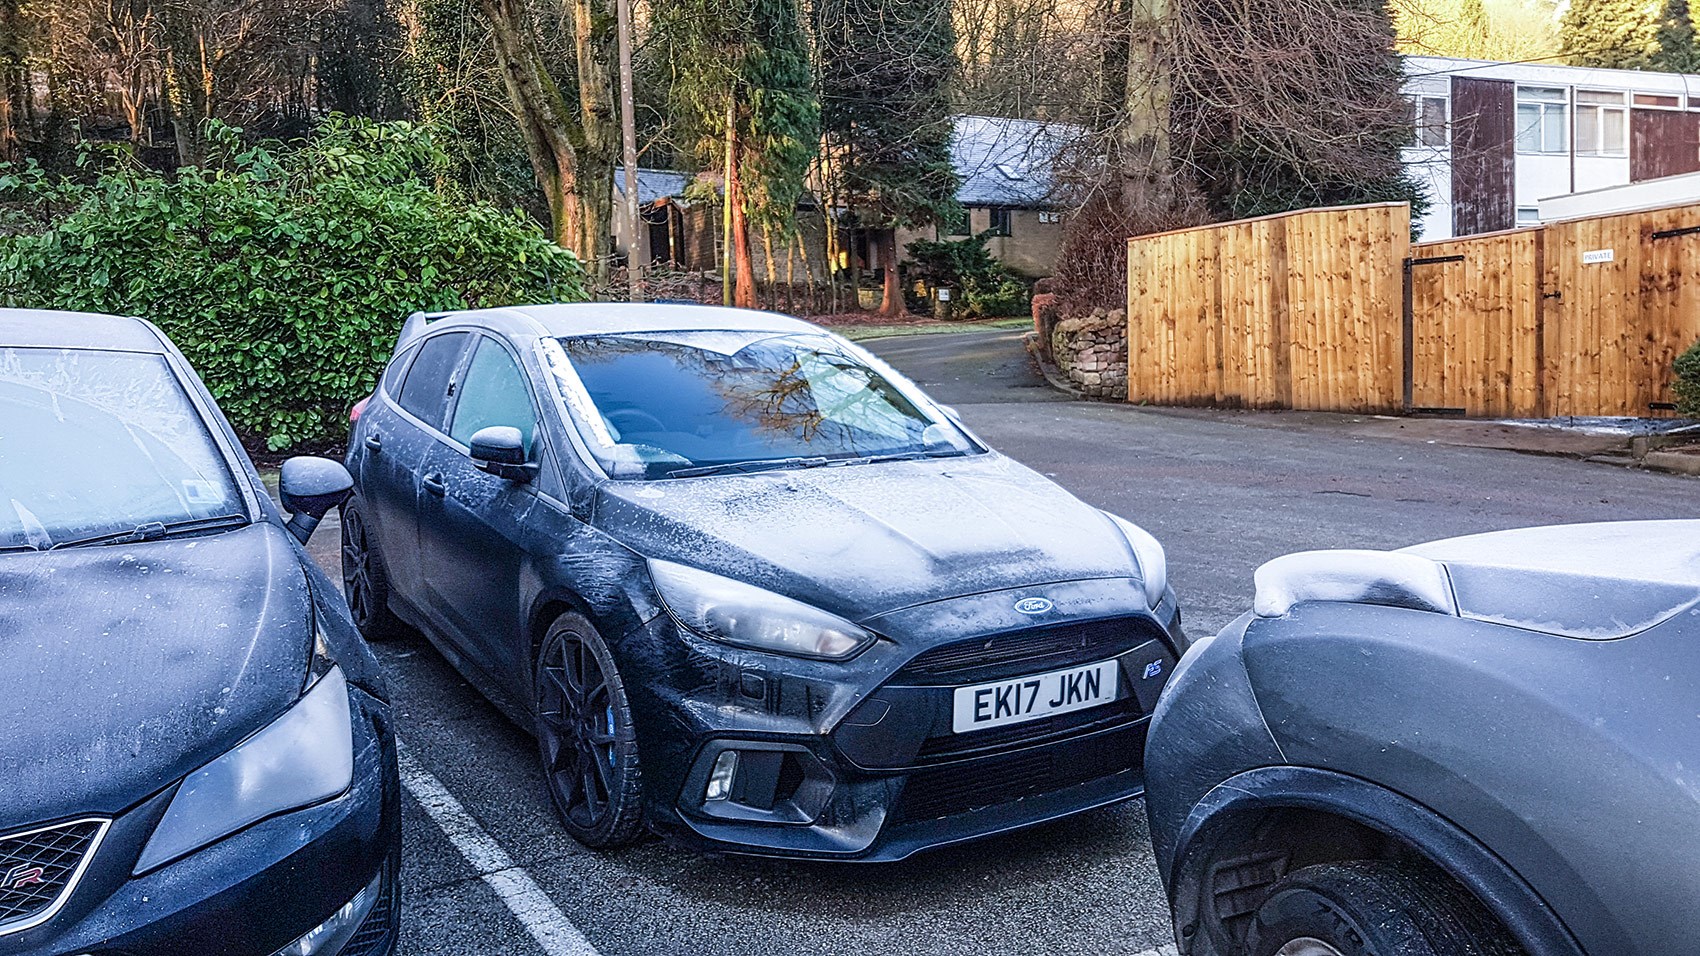 Ford Focus Rs 2018 Long Term Test Review Car Magazine